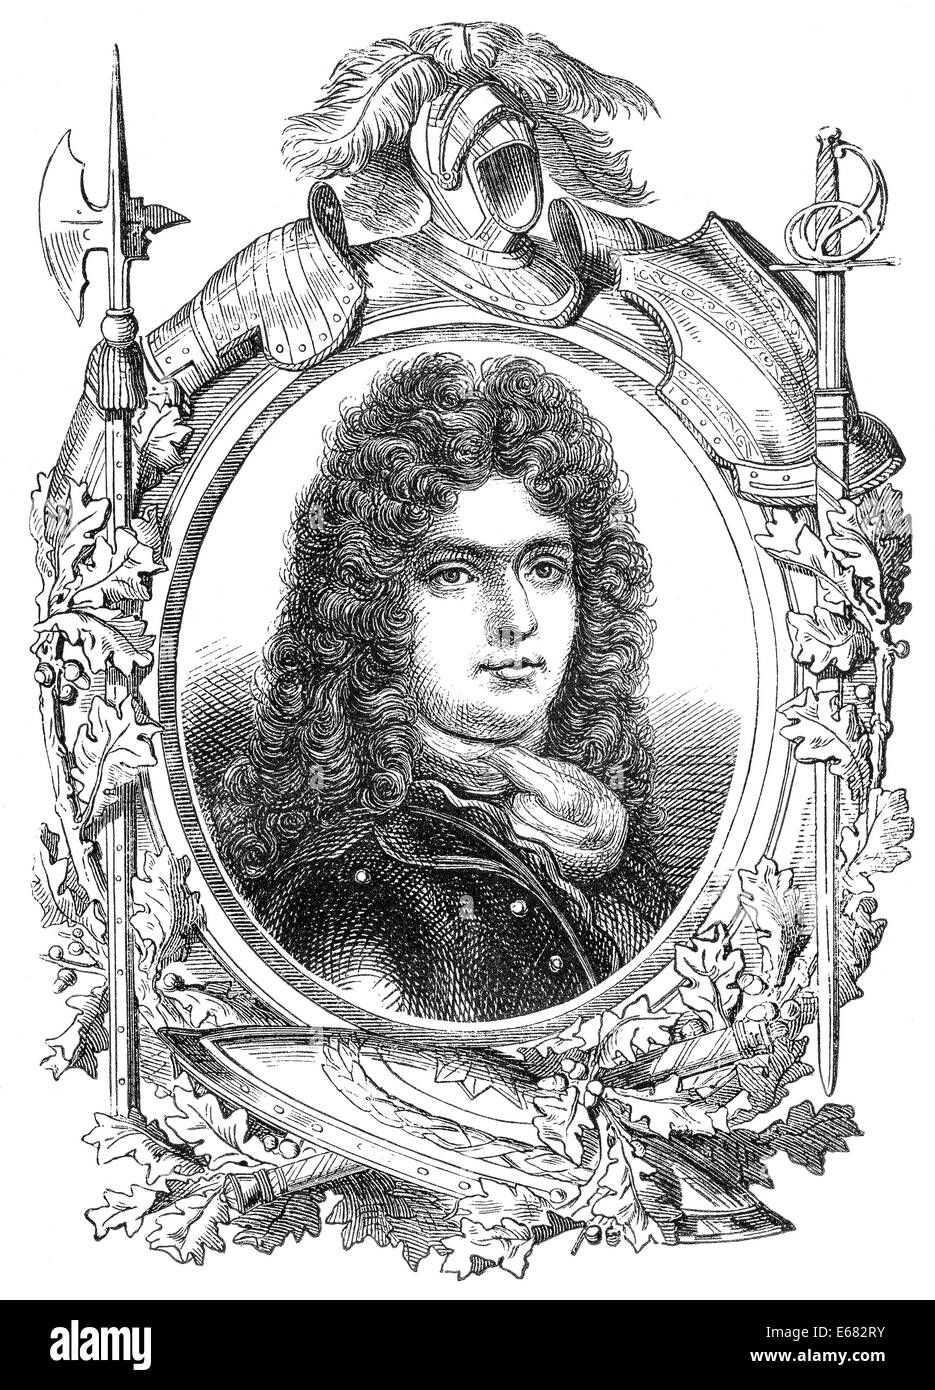 Louis François de Boufflers, Duke of Boufflers, Count of Cagny, 1644-1711, a Marshal of France, Stock Photo